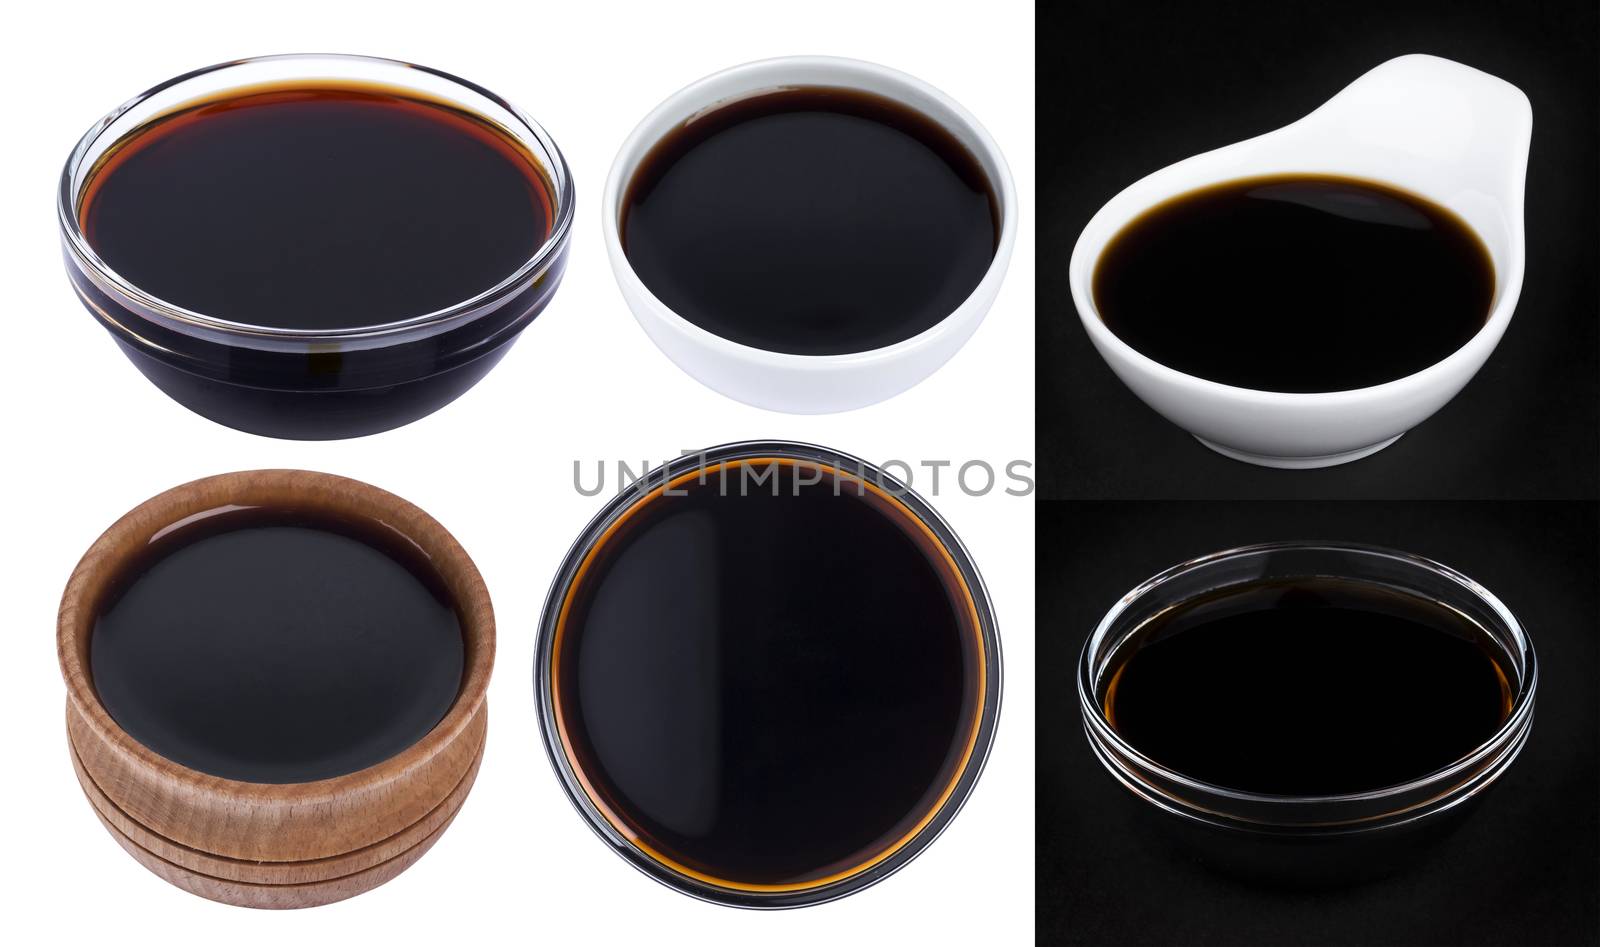 Soy sauce in bowl isolated on white background with clipping path.